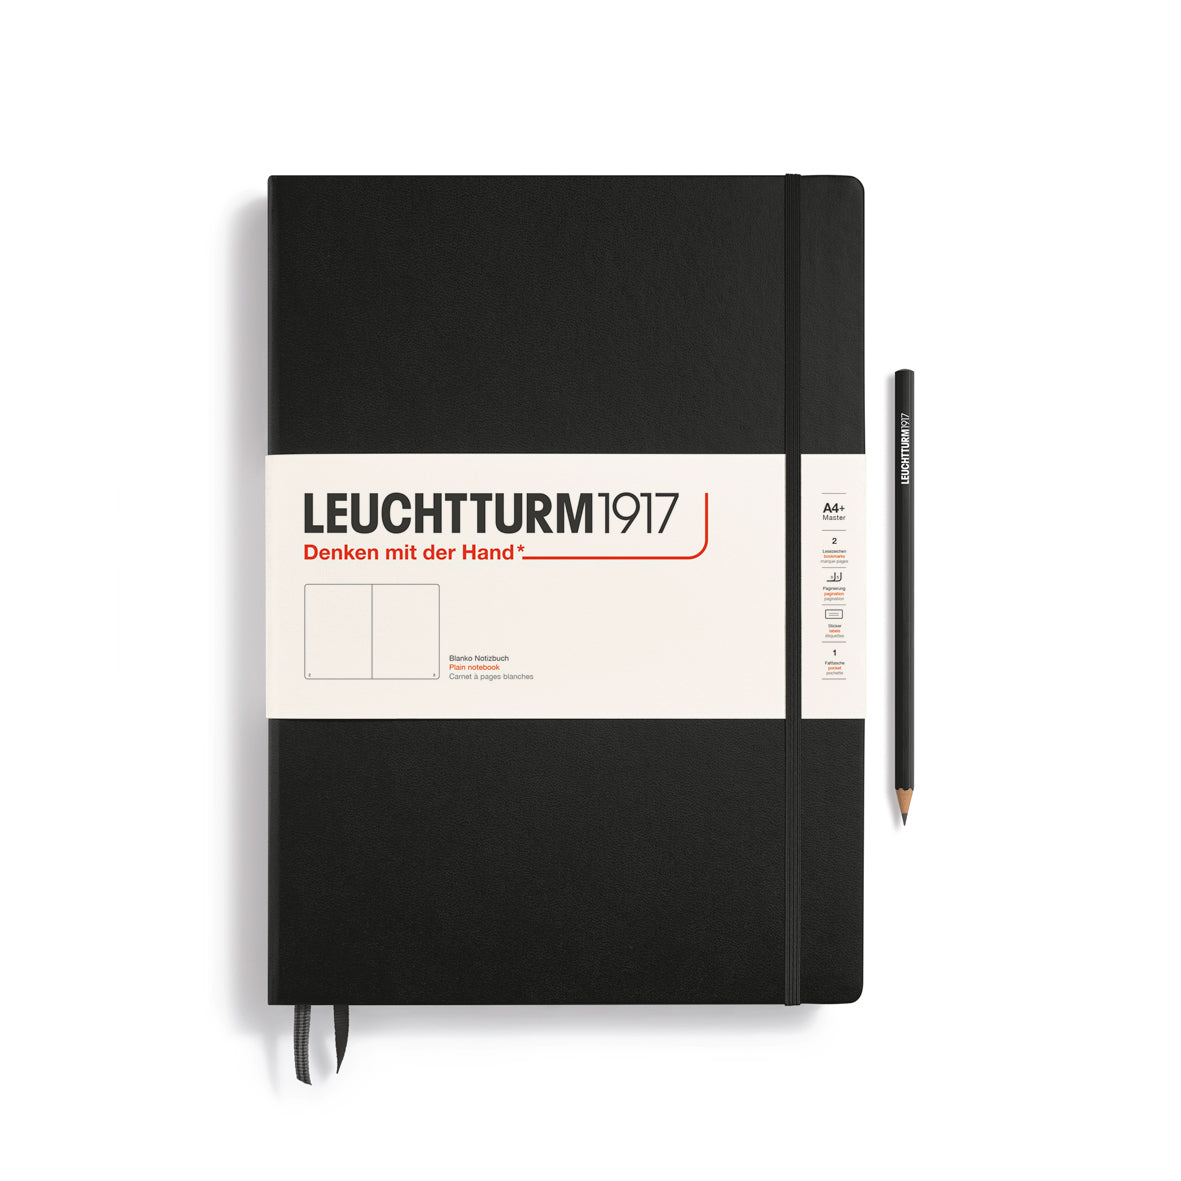 Master A4+ Plain Hardcover Notebook